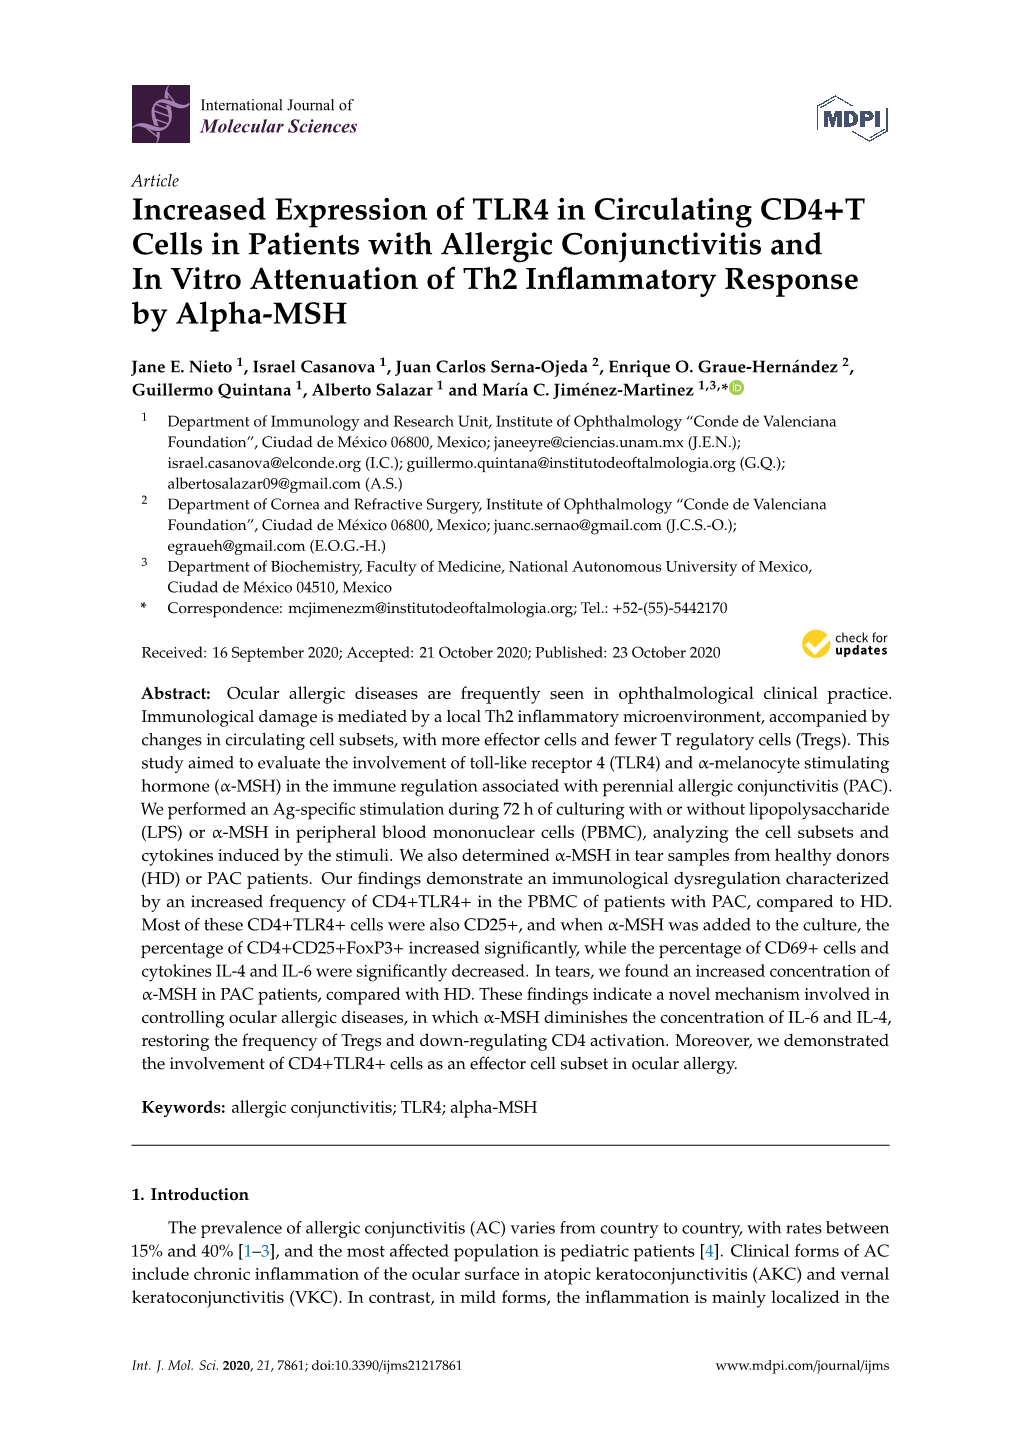 Increased Expression of TLR4 in Circulating CD4+T Cells in Patients with Allergic Conjunctivitis and in Vitro Attenuation of Th2 Inﬂammatory Response by Alpha-MSH